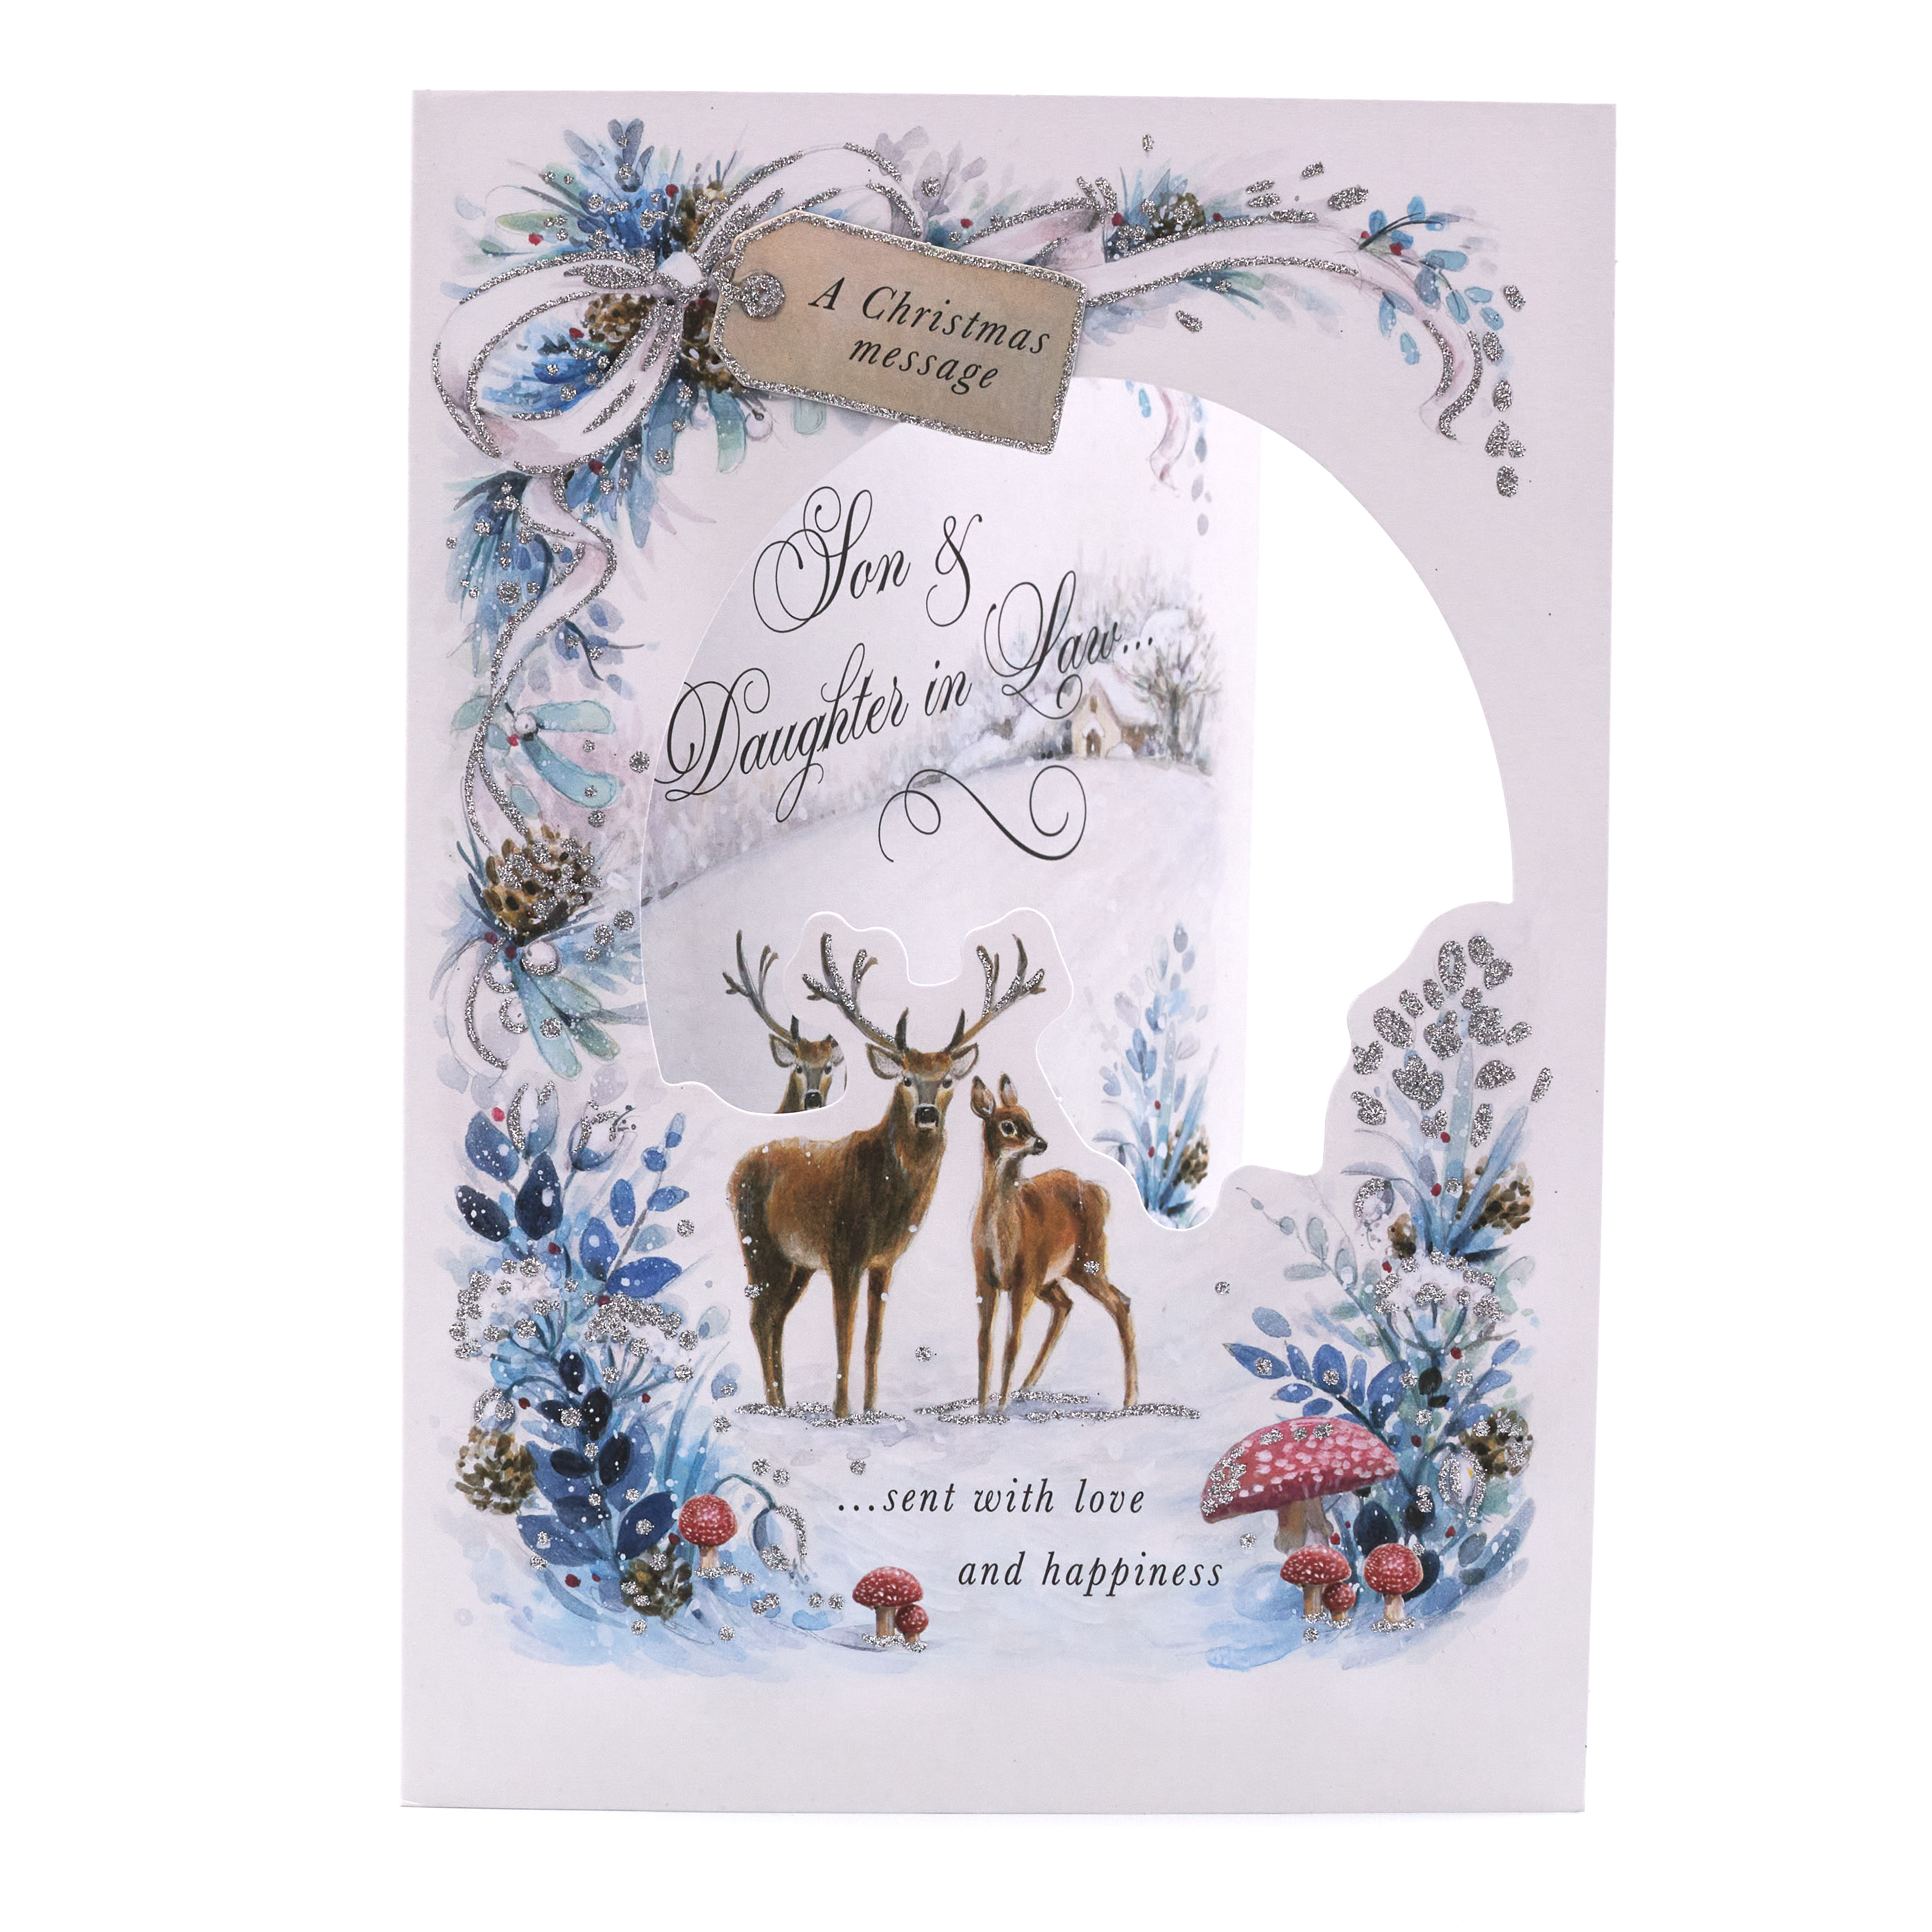 Christmas Card - Son And Daughter In Law, Deer In The Woods